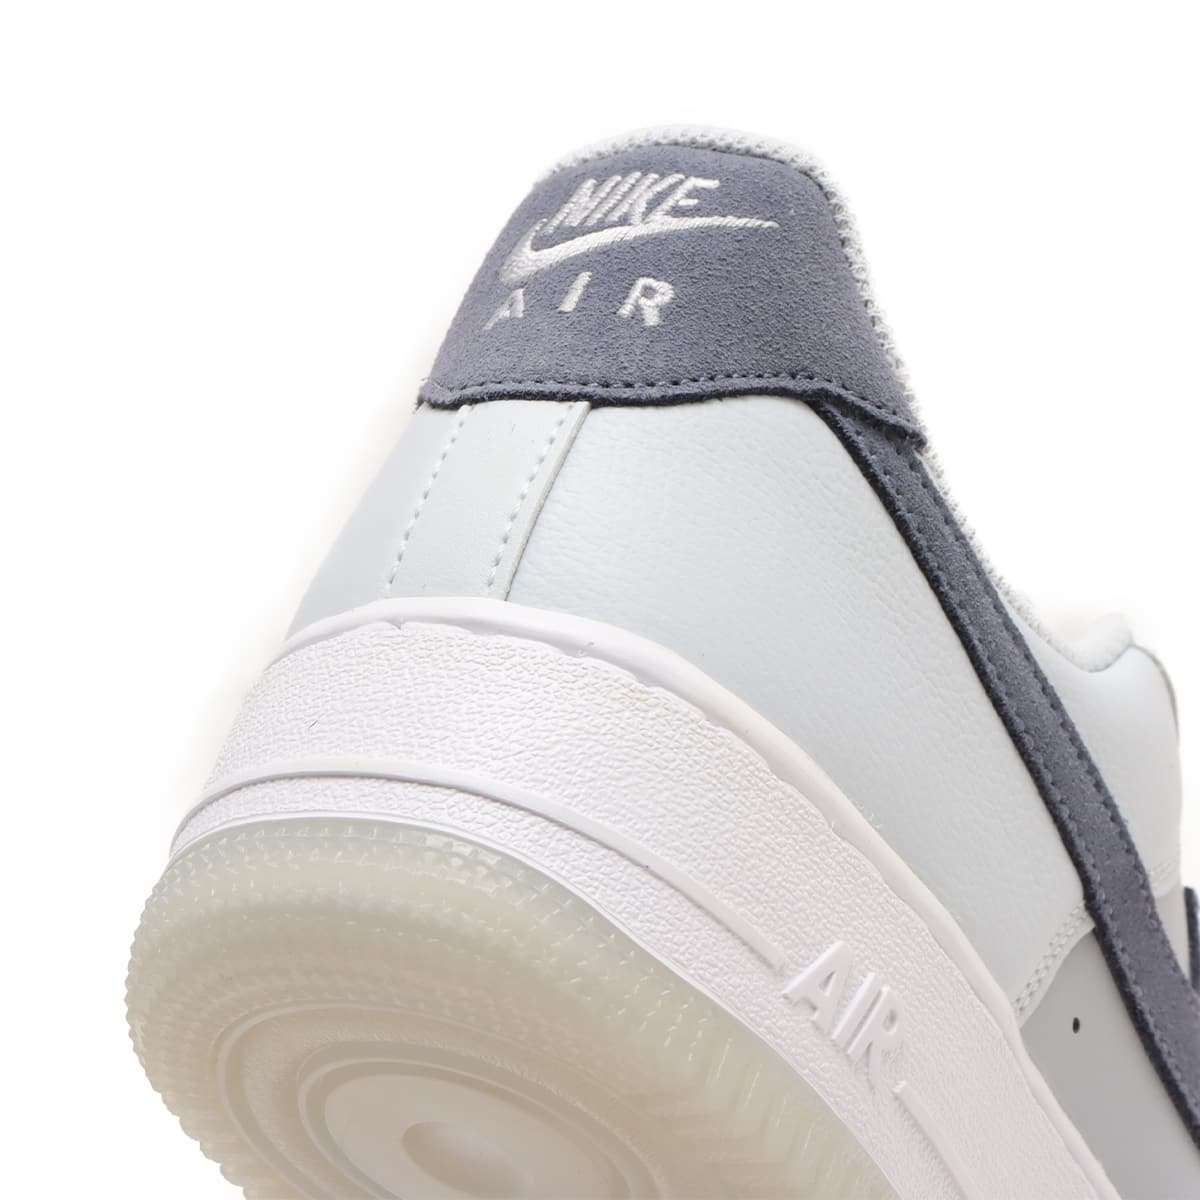 NIKE AIR FORCE 1 '07 LV8 PURE PLATINUM/LIGHT CARBON-WOLF GREY